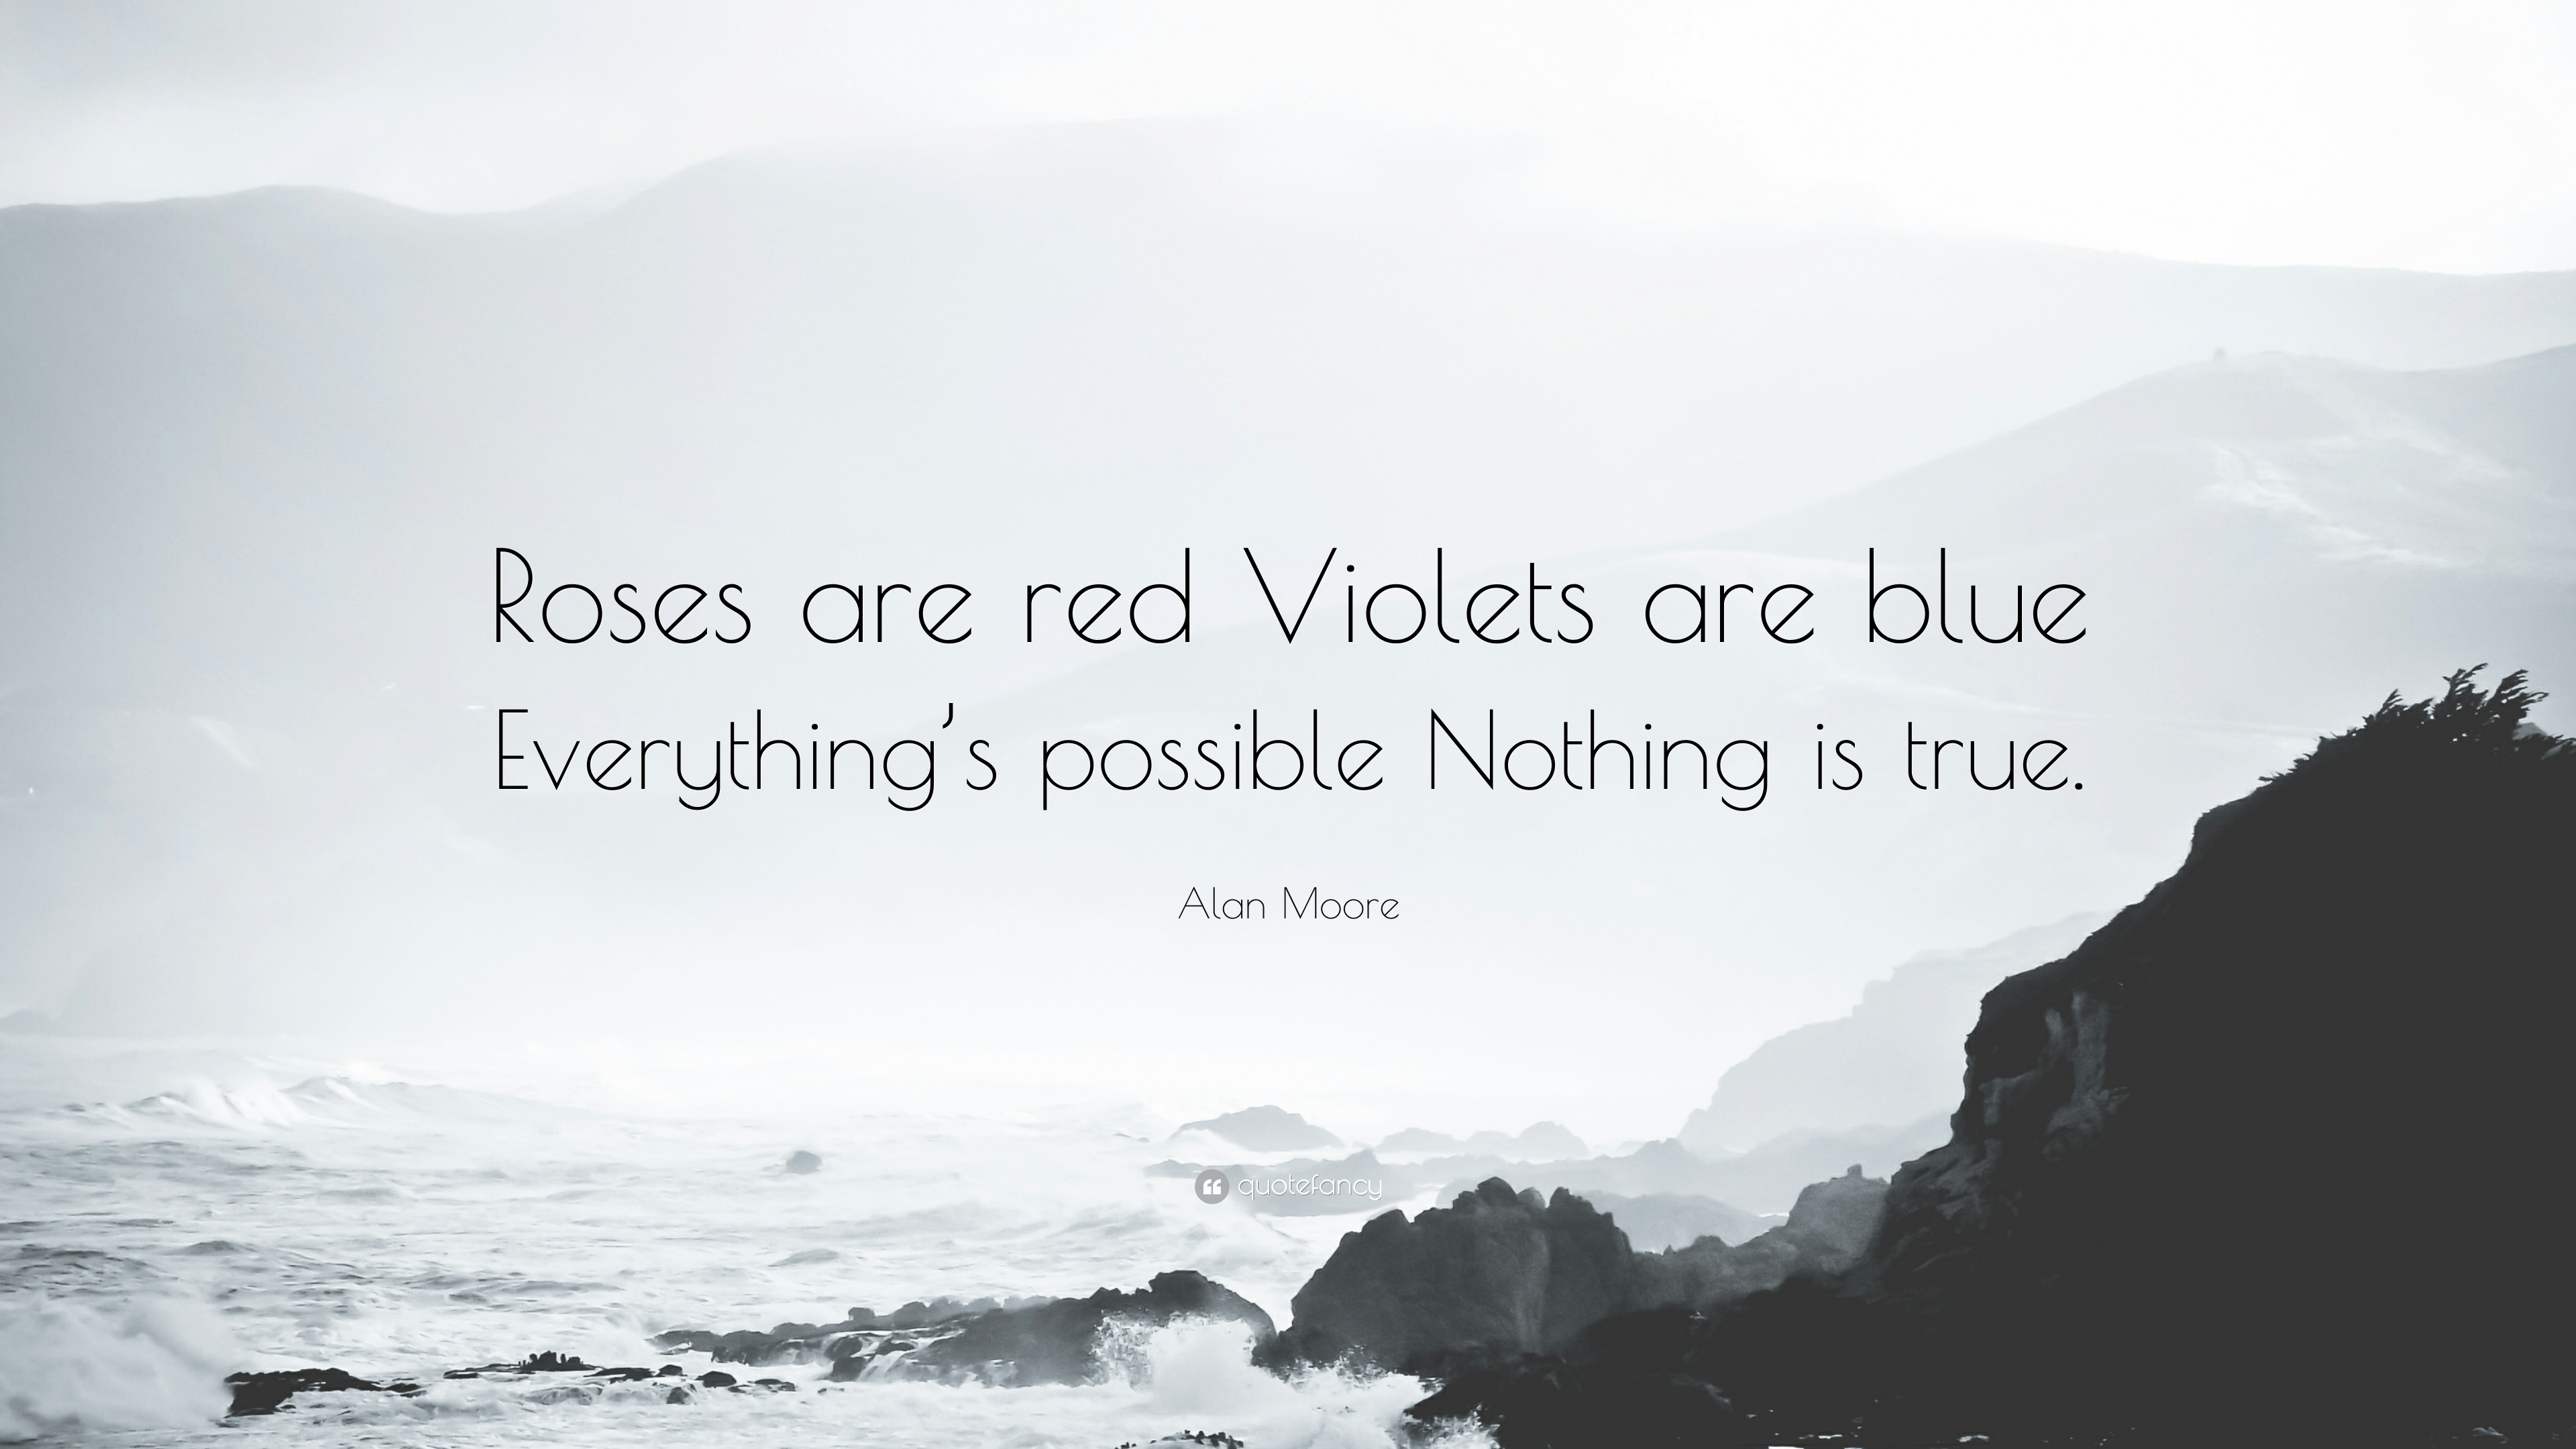 Alan Moore Quote: “Roses are red Violets are blue Everything's possible Nothing is true.”